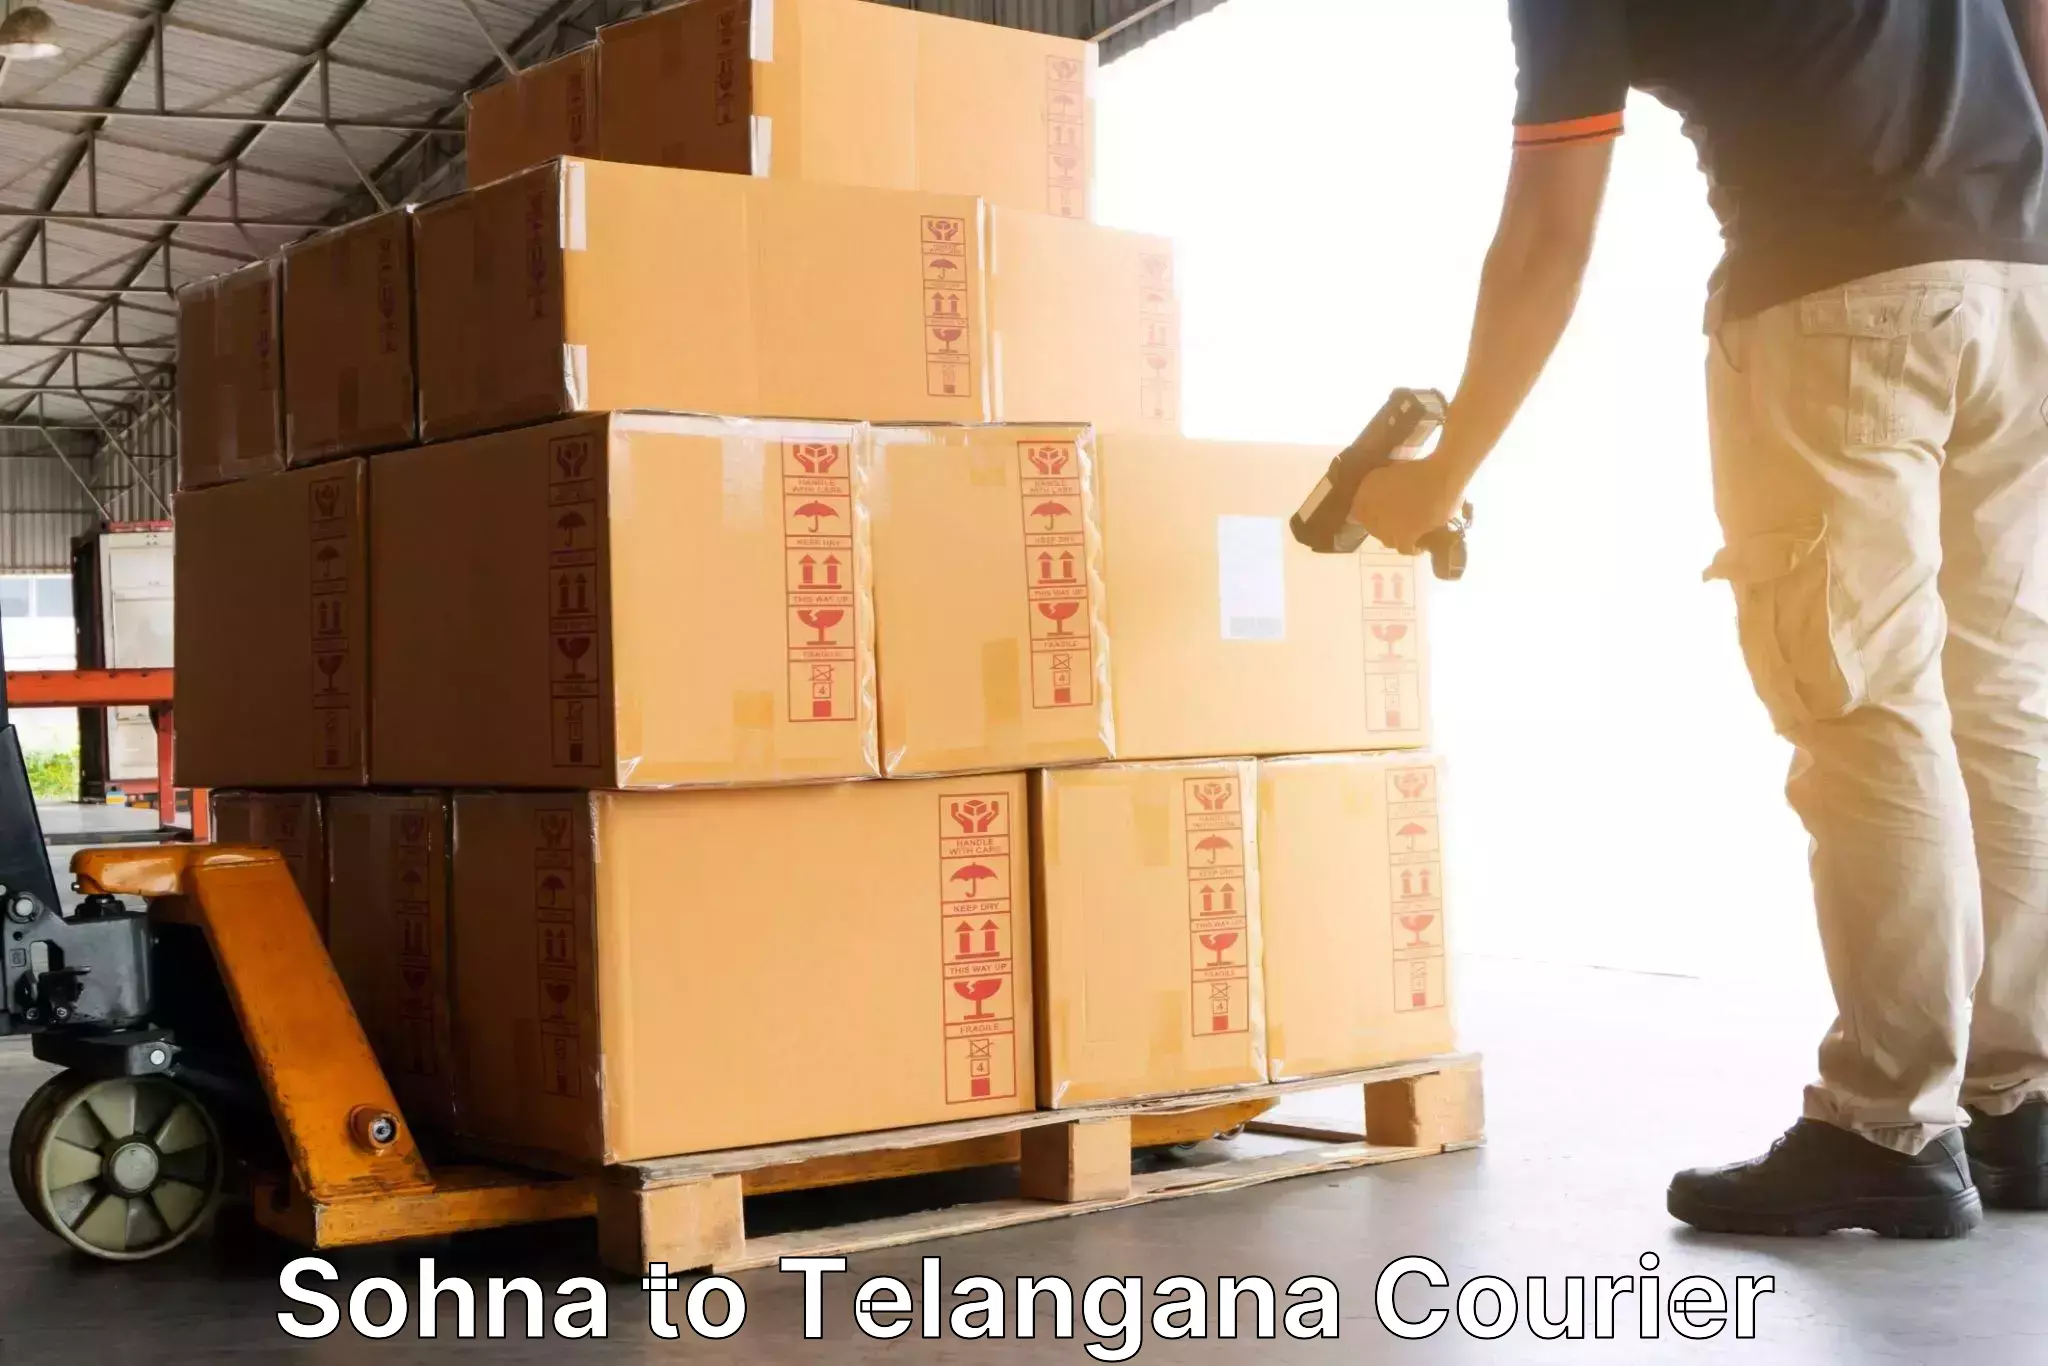 Global shipping solutions Sohna to Khairatabad